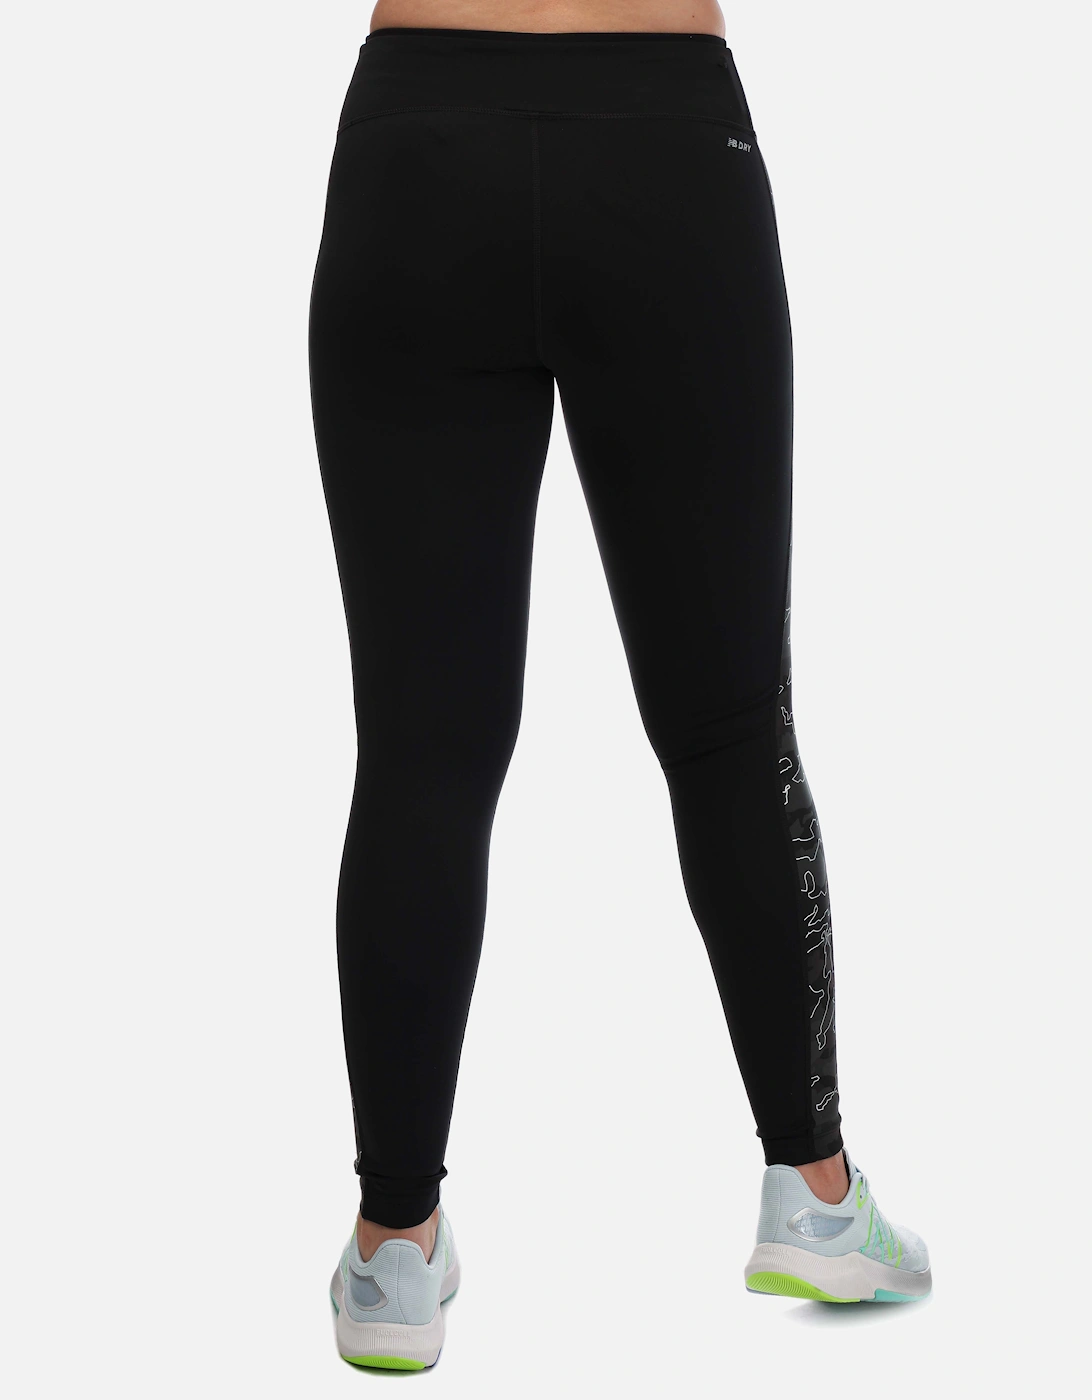 Womens Reflective Print Accelerate Tights